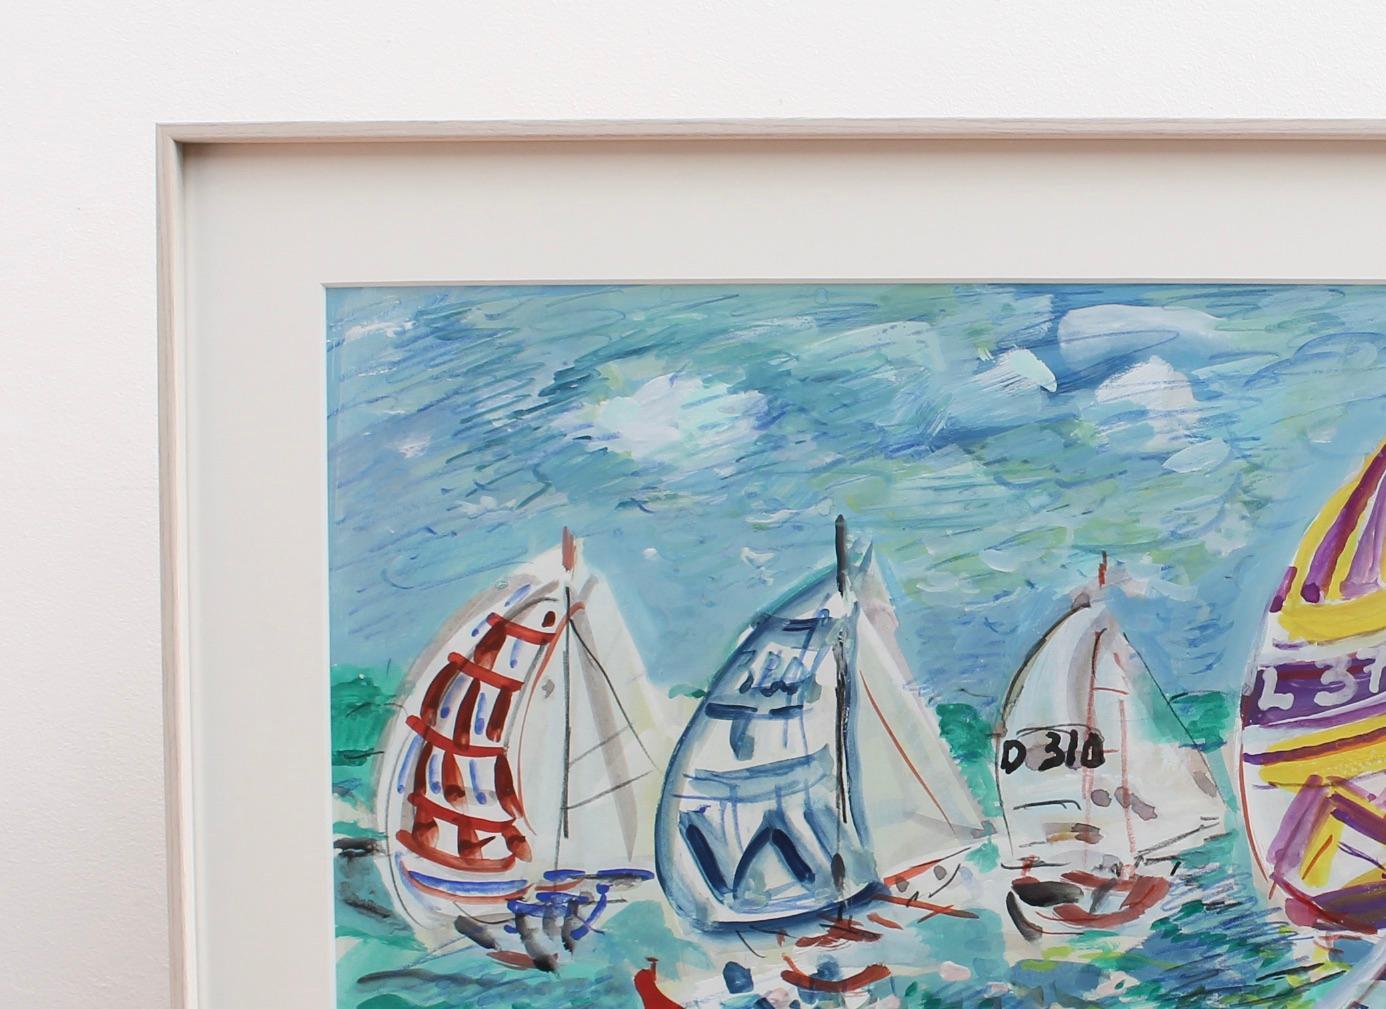 Spinnakers Out - La Trinité Regatta - Expressionist Art by Maurice EMPI